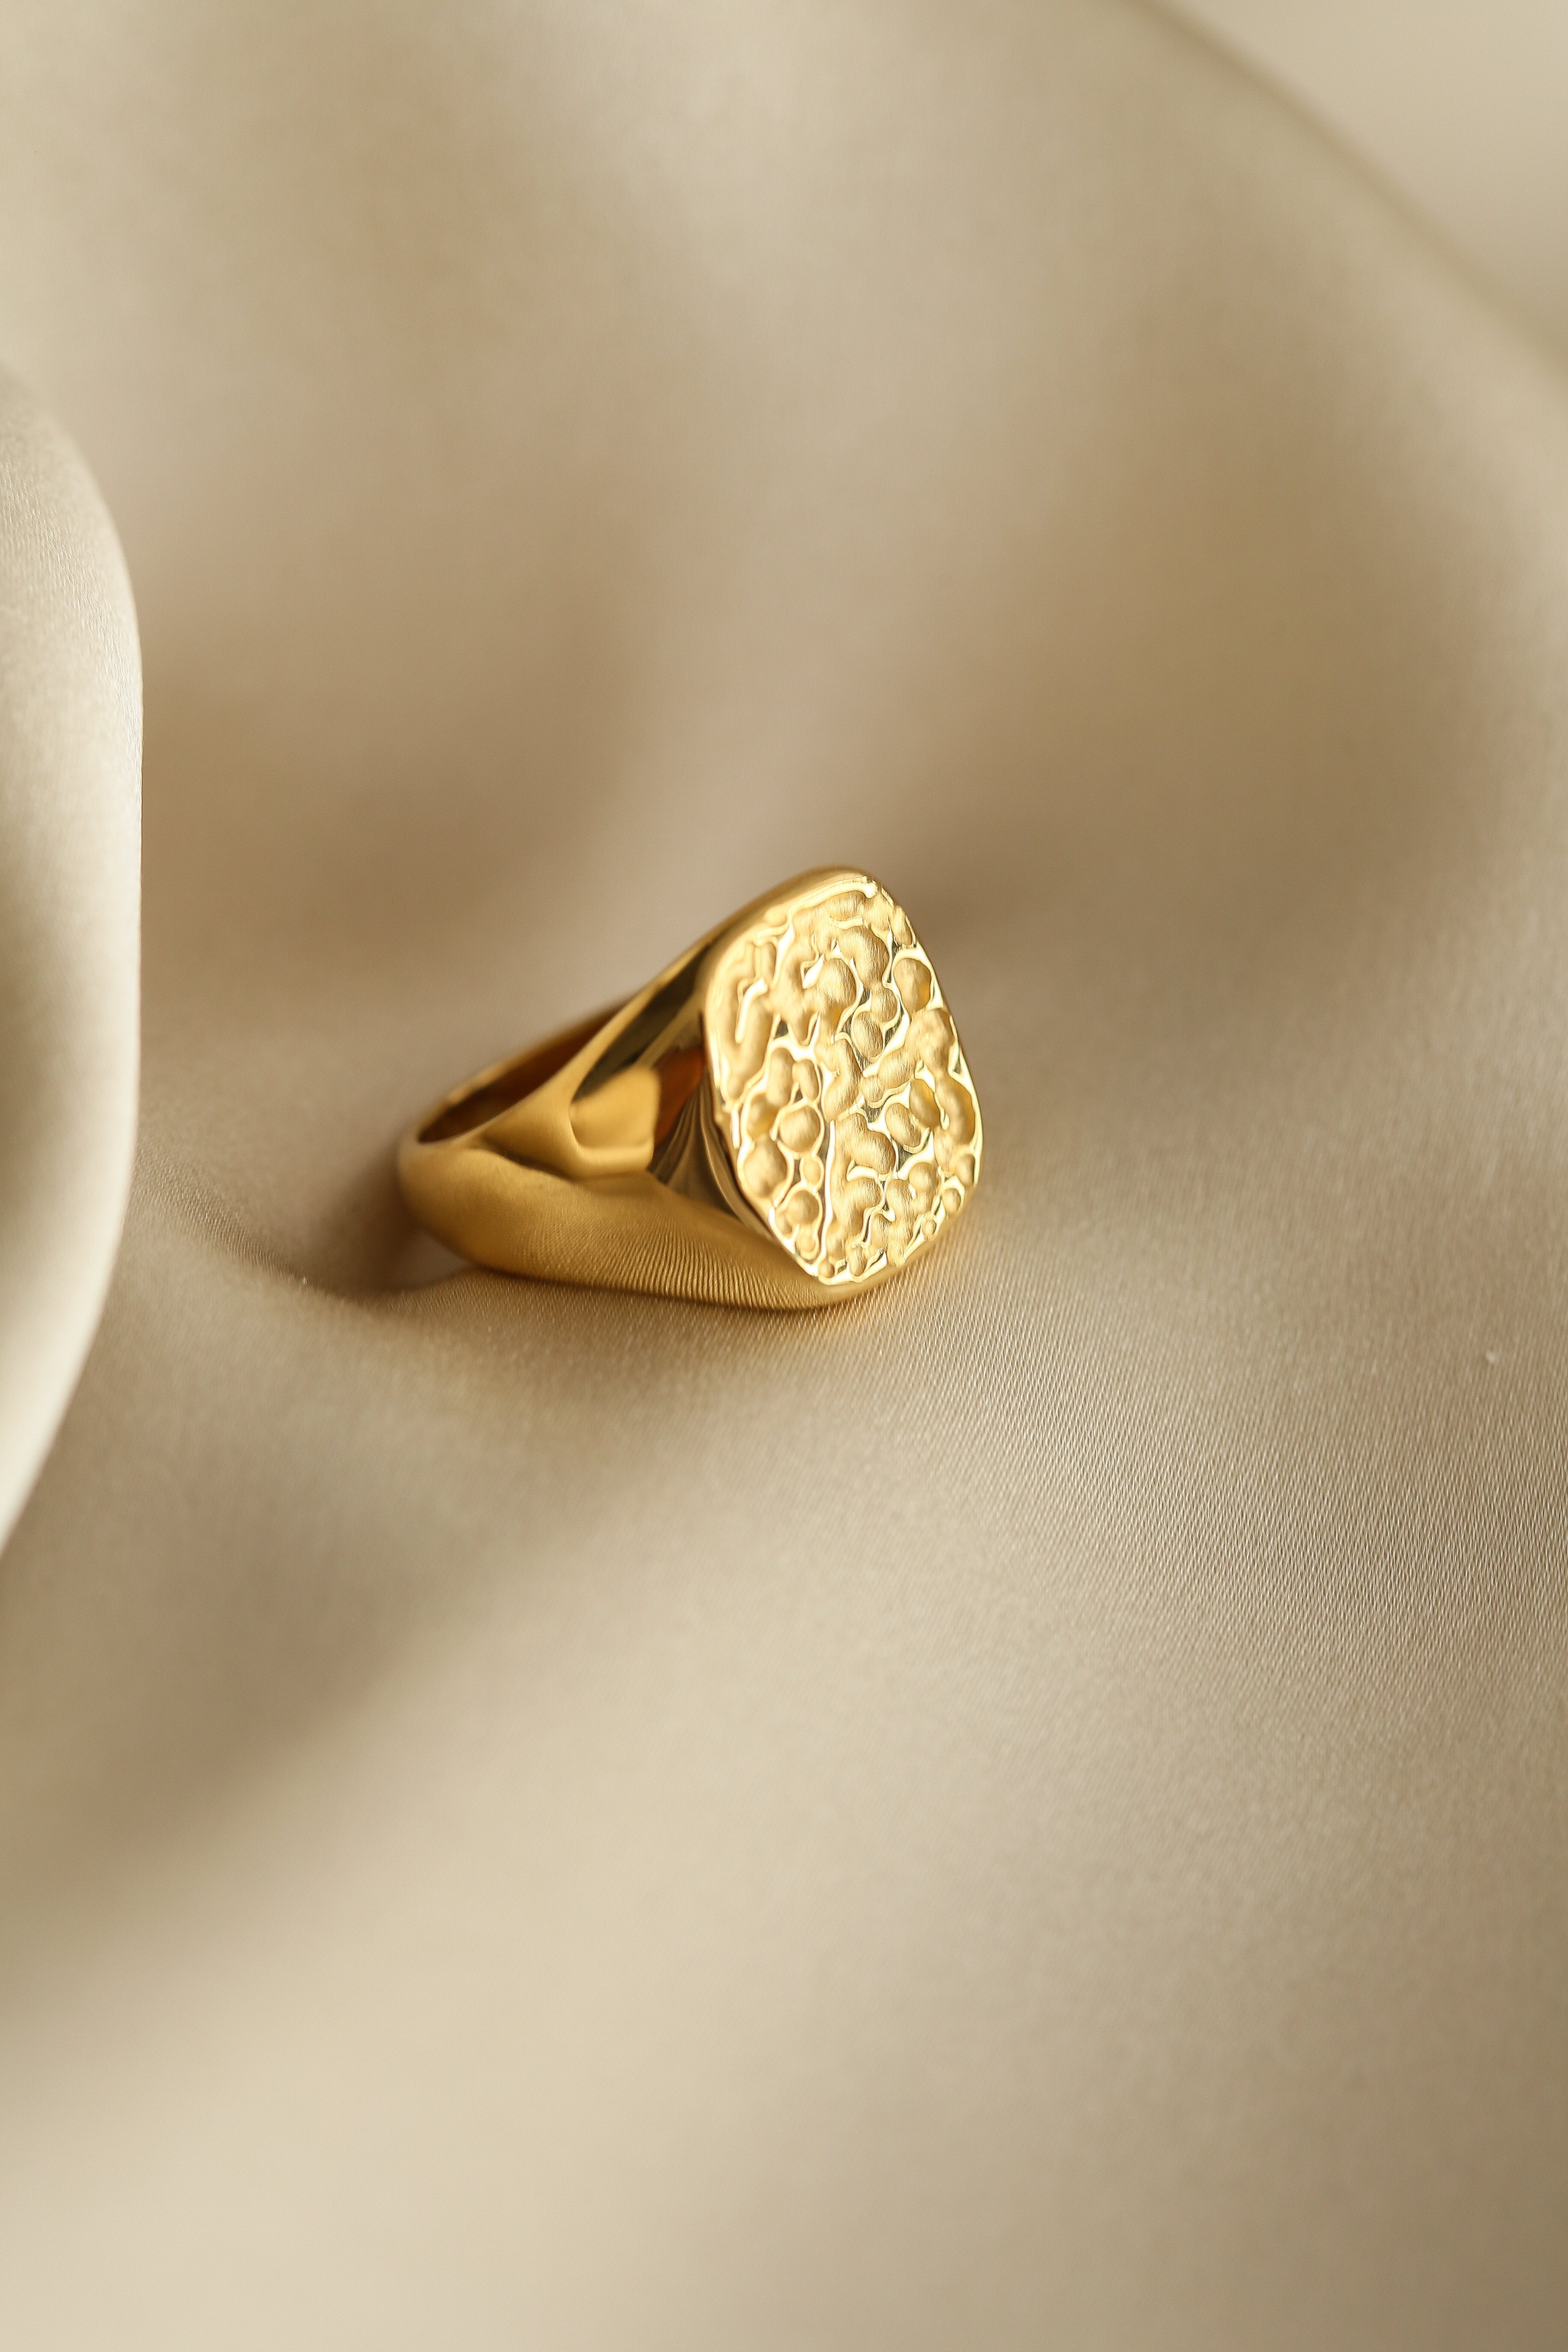 Helena Ring - Boutique Minimaliste has waterproof, durable, elegant and vintage inspired jewelry